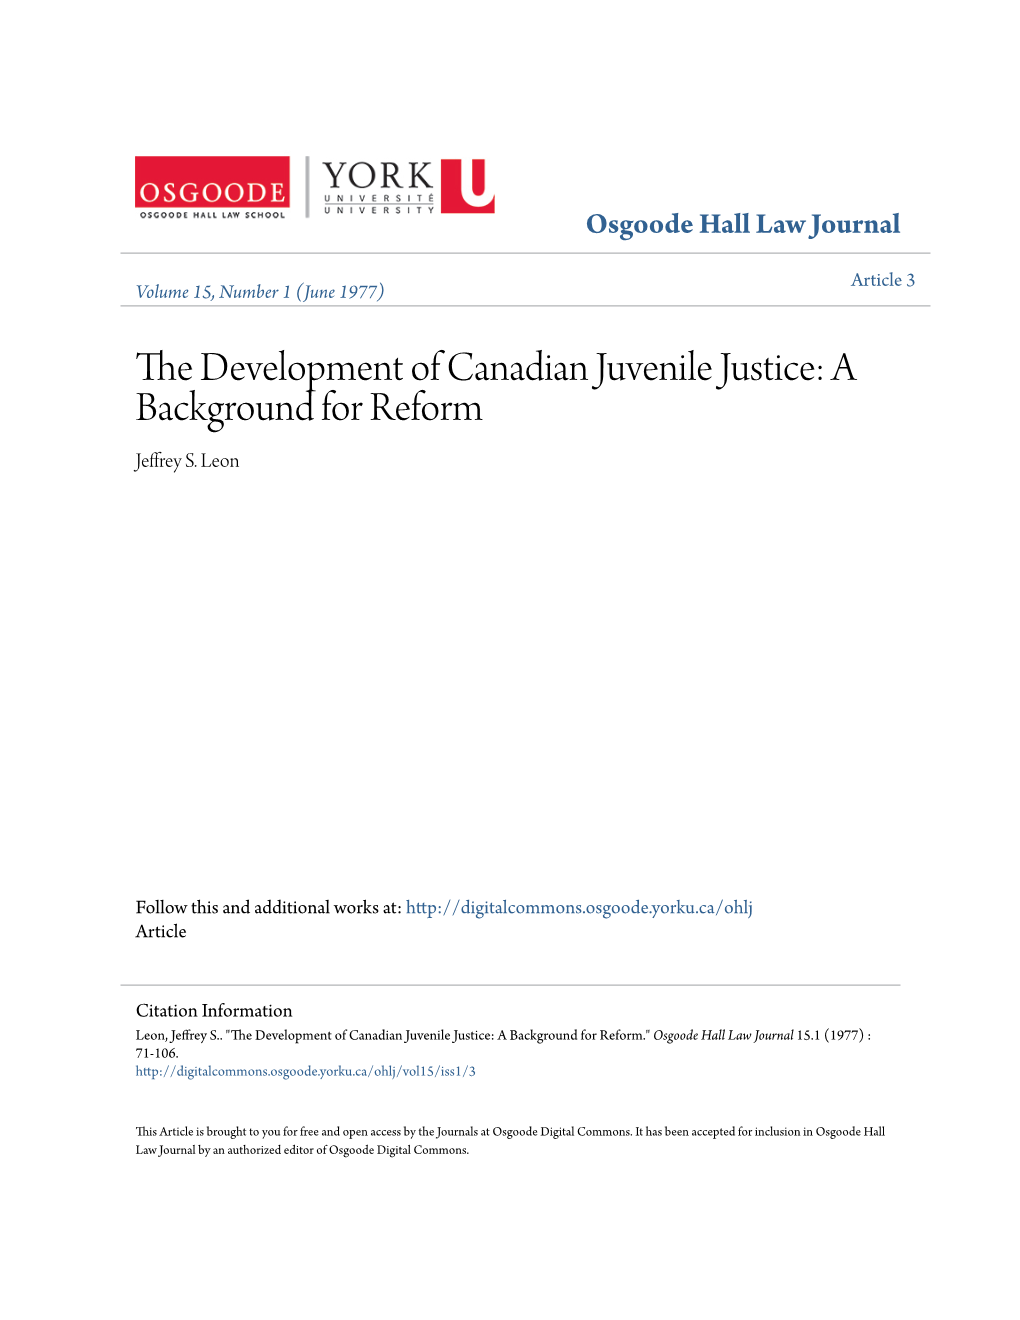 THE DEVELOPMENT of CANADIAN JUVENILE JUSTICE: a BACKGROUND for REFORM by JEFFREY S